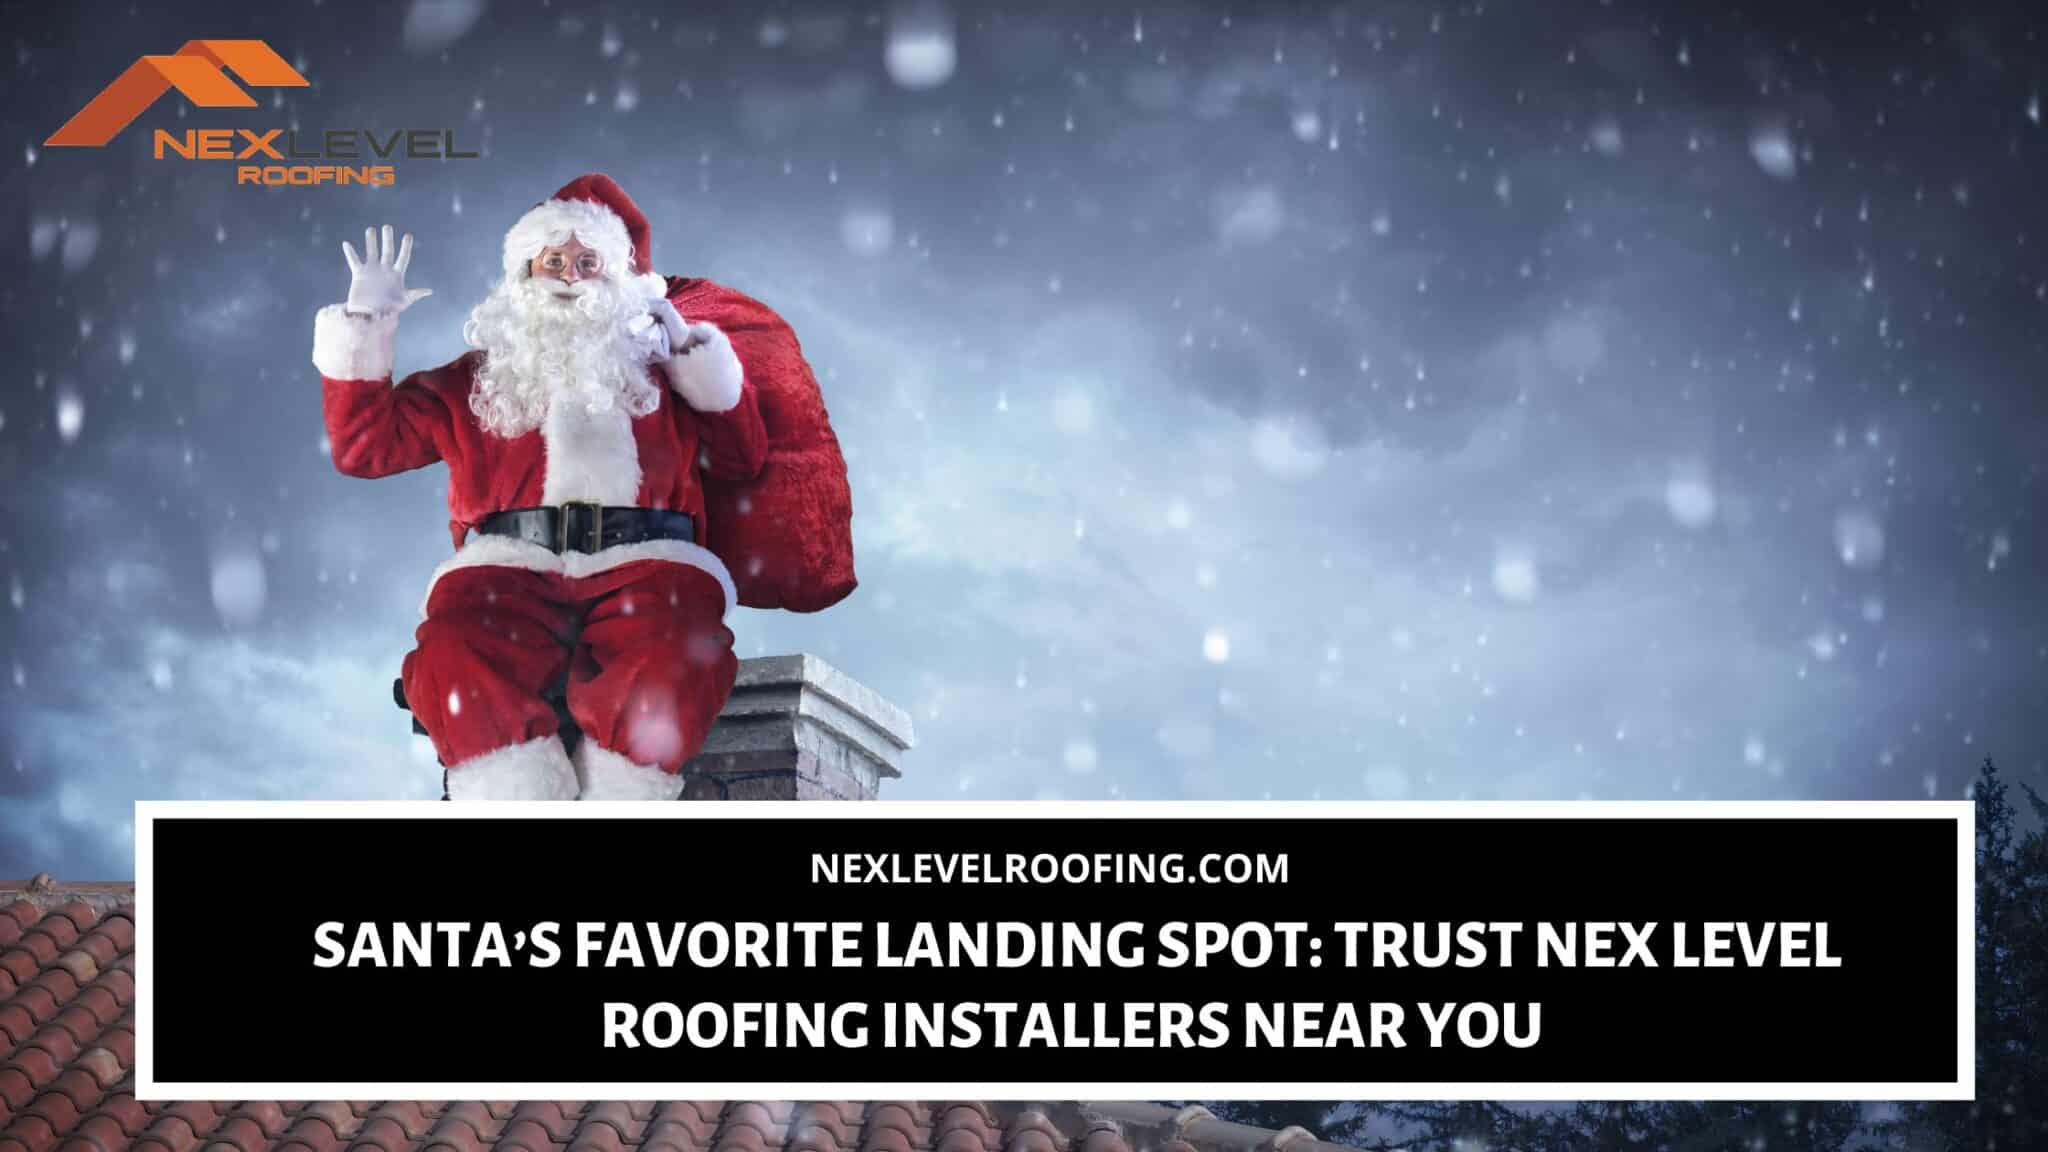 Roofing installers near me